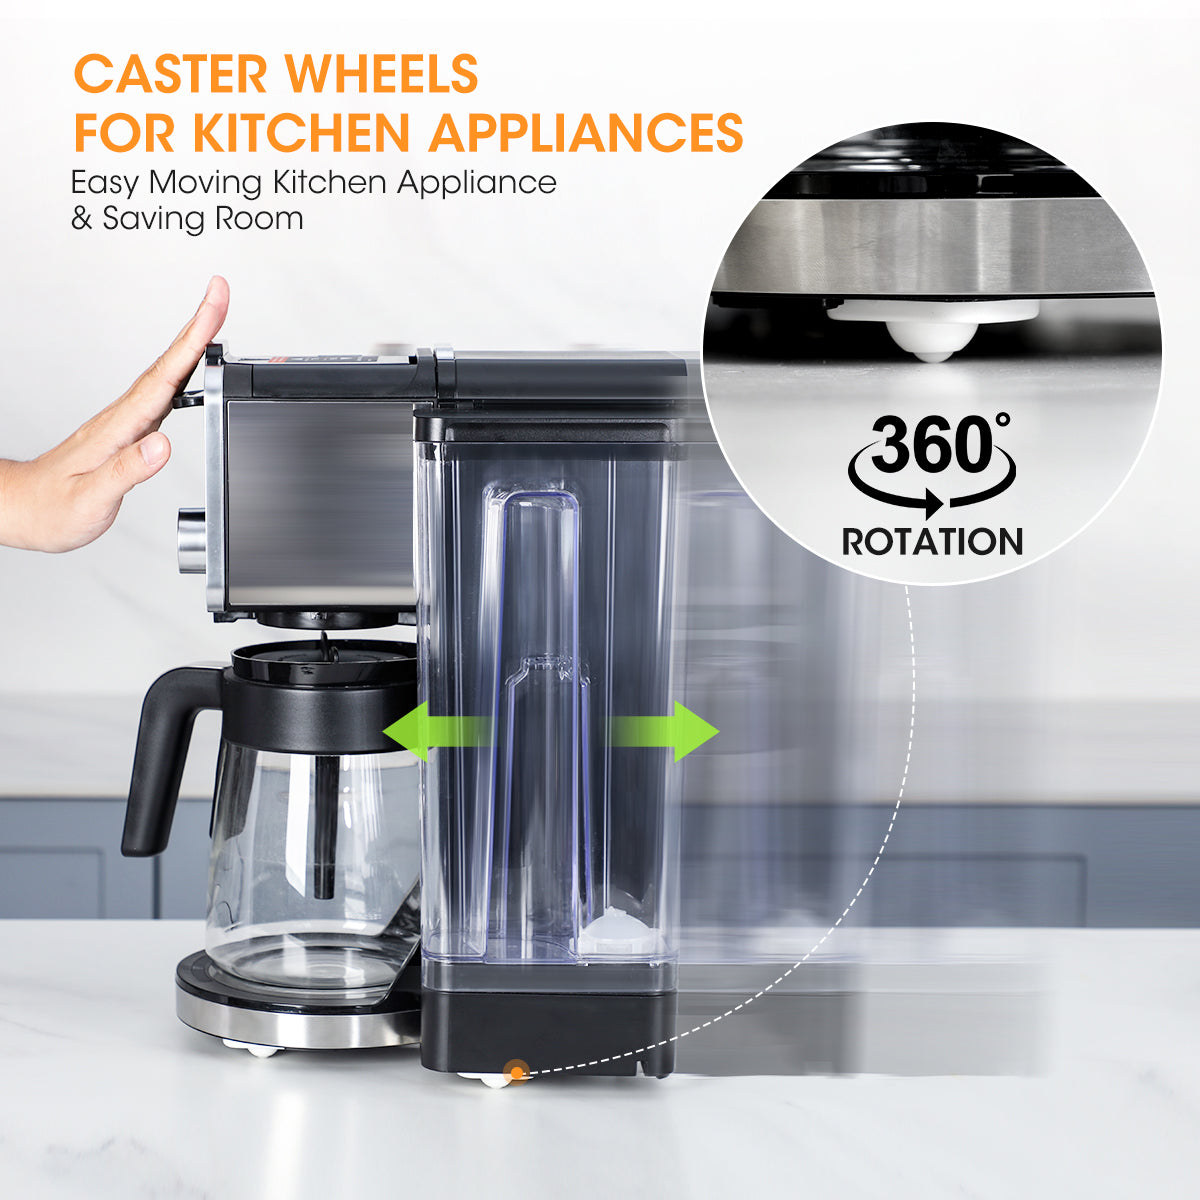 mini caster wheels for kitchen appliances-easy moving kitchen appliance & saving space